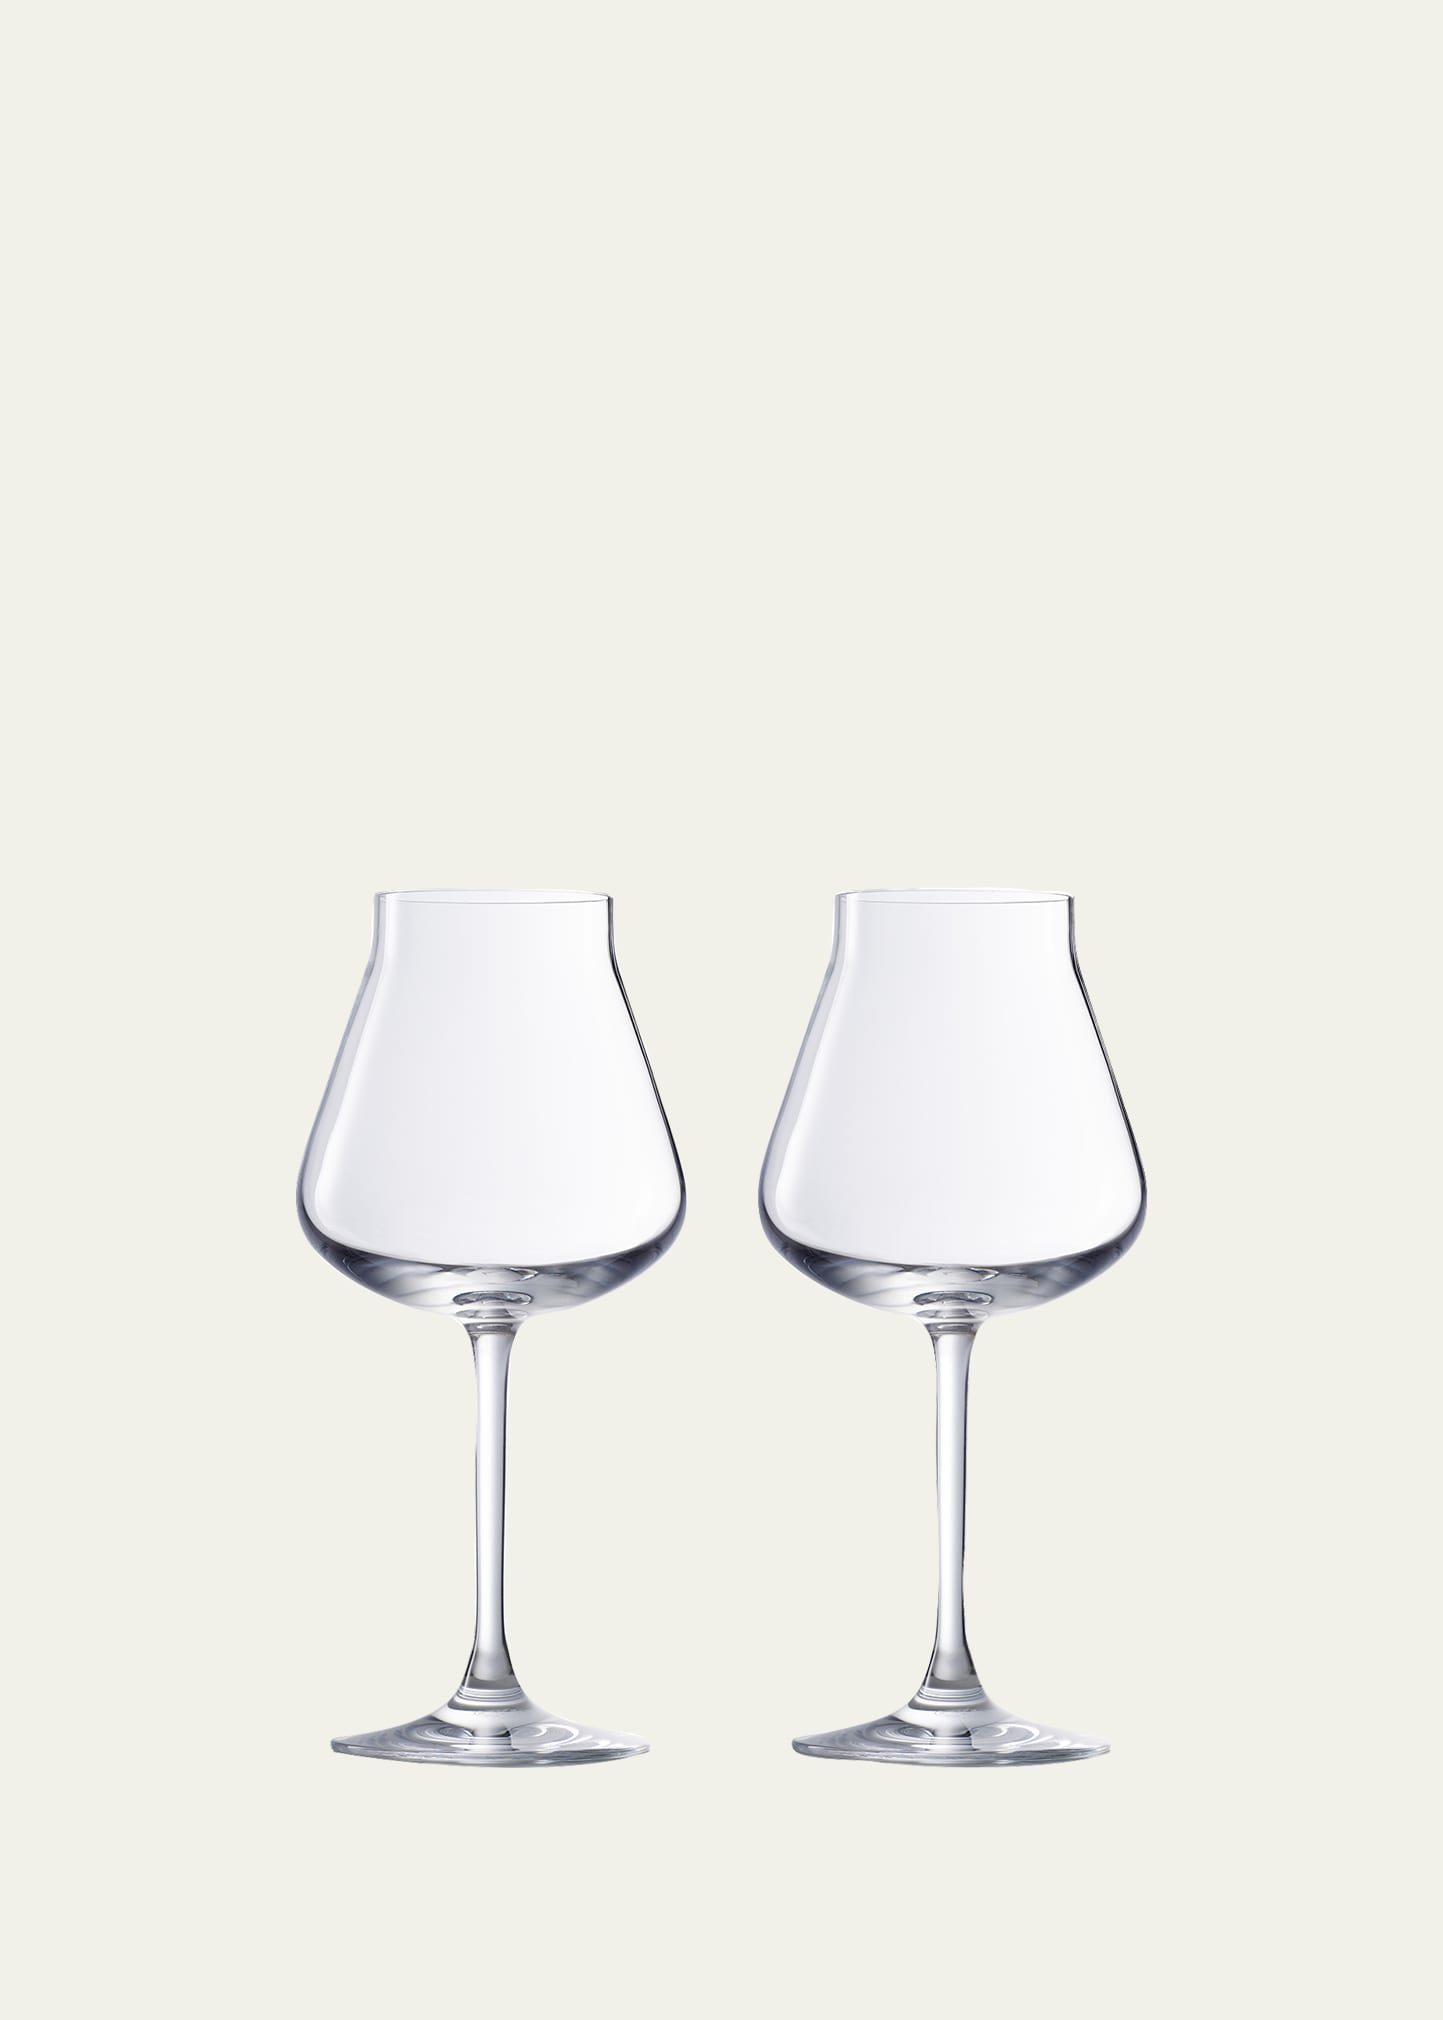 Baccarat Chateau White Wine Glasses, Set Of 2